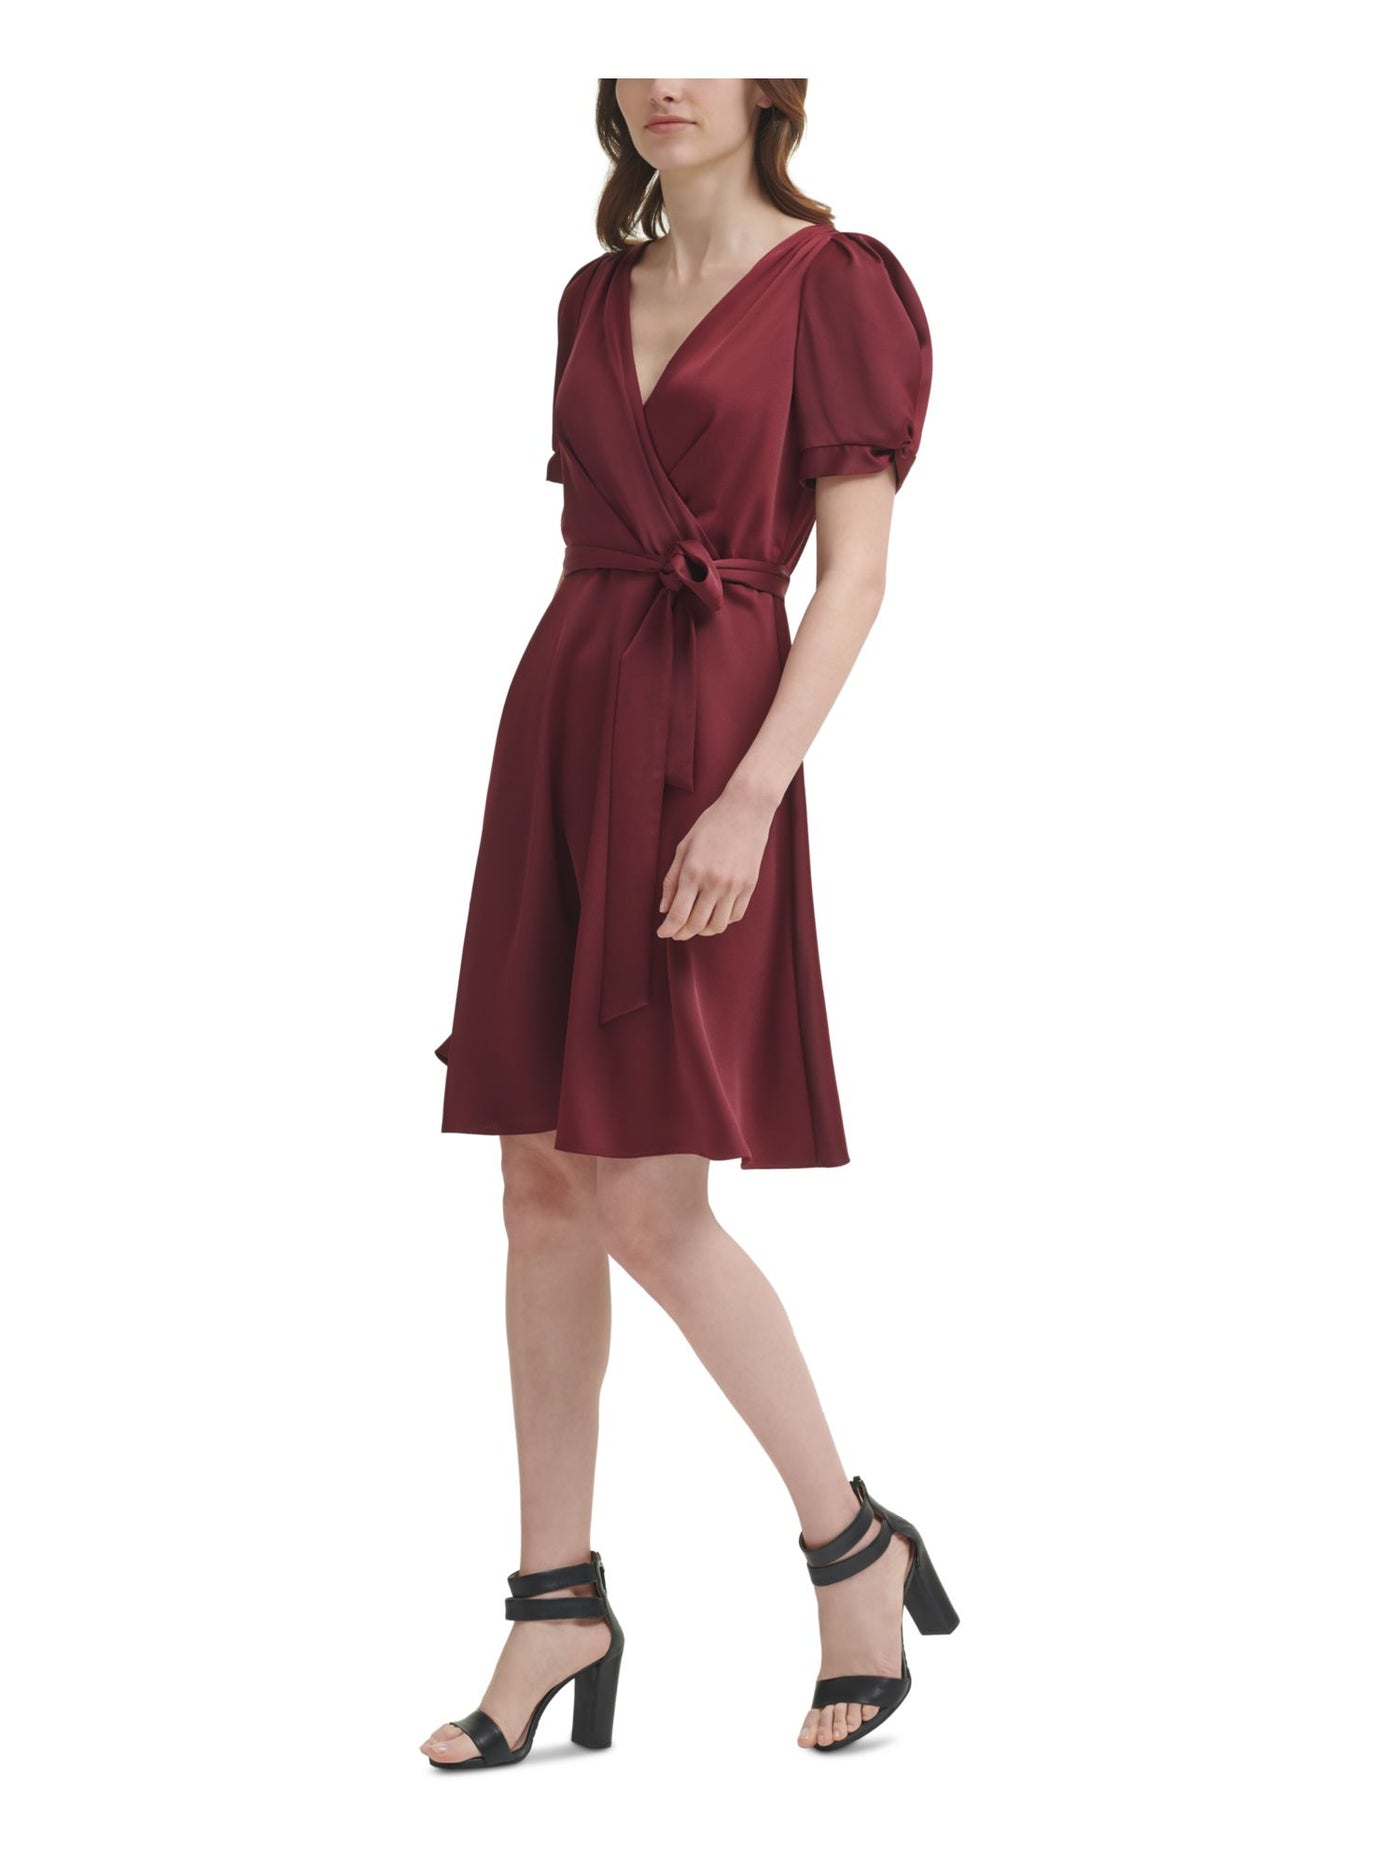 VINCE CAMUTO Womens Maroon Smocked Pleated Self Tie Waist Scuba Crepe Butto 3/4 Sleeve Boat Neck Above The Knee Wear To Work Sheath Dress Petites 8P